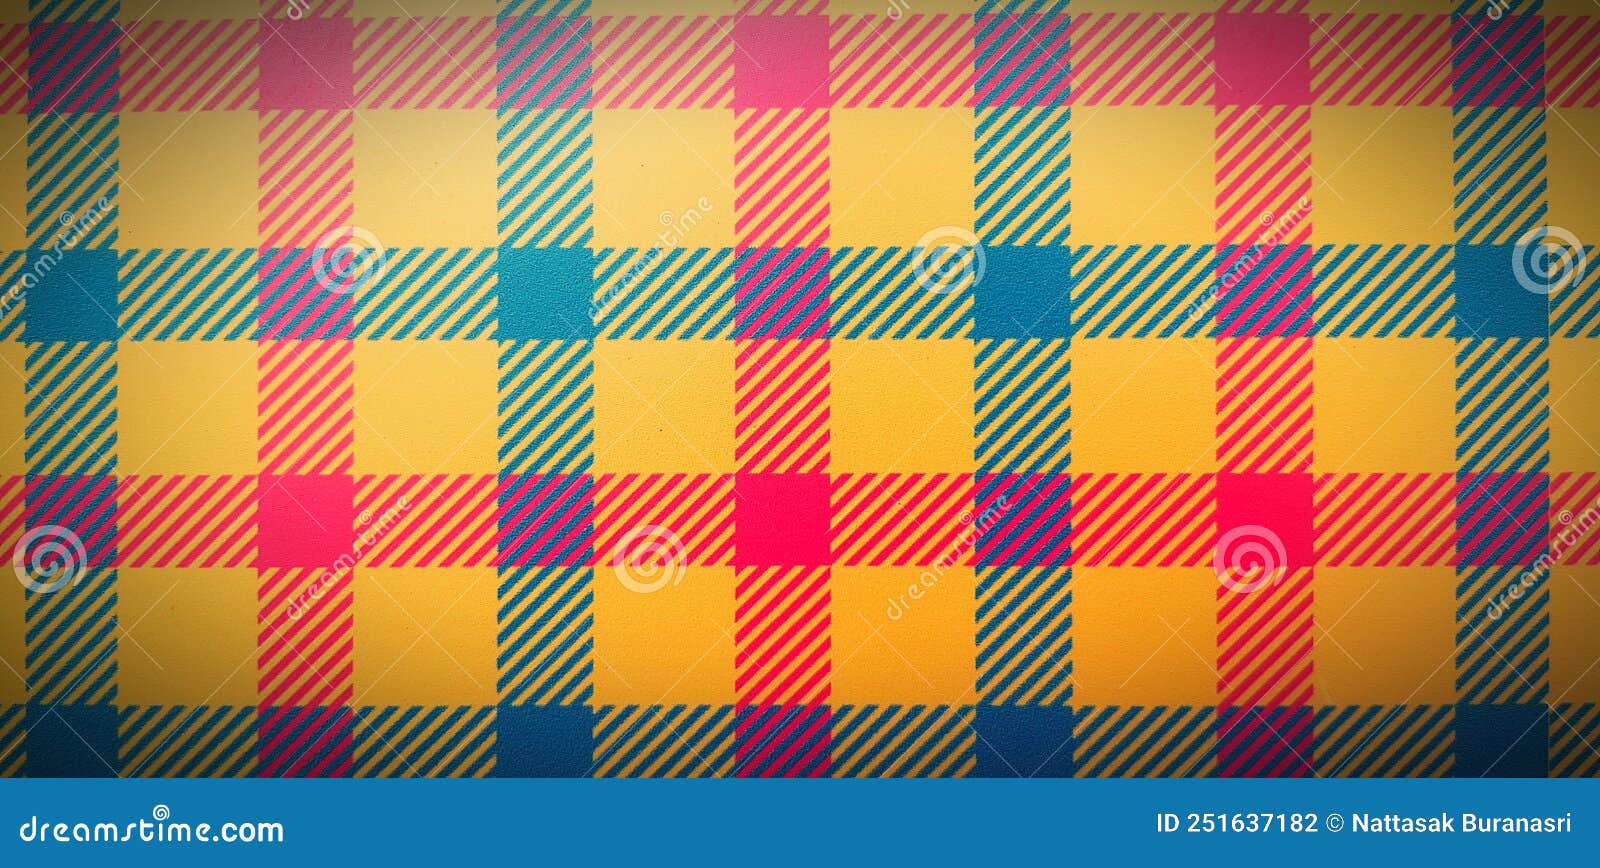 Colorful Art of Plaid Line Background . Seamless Pattern with Red